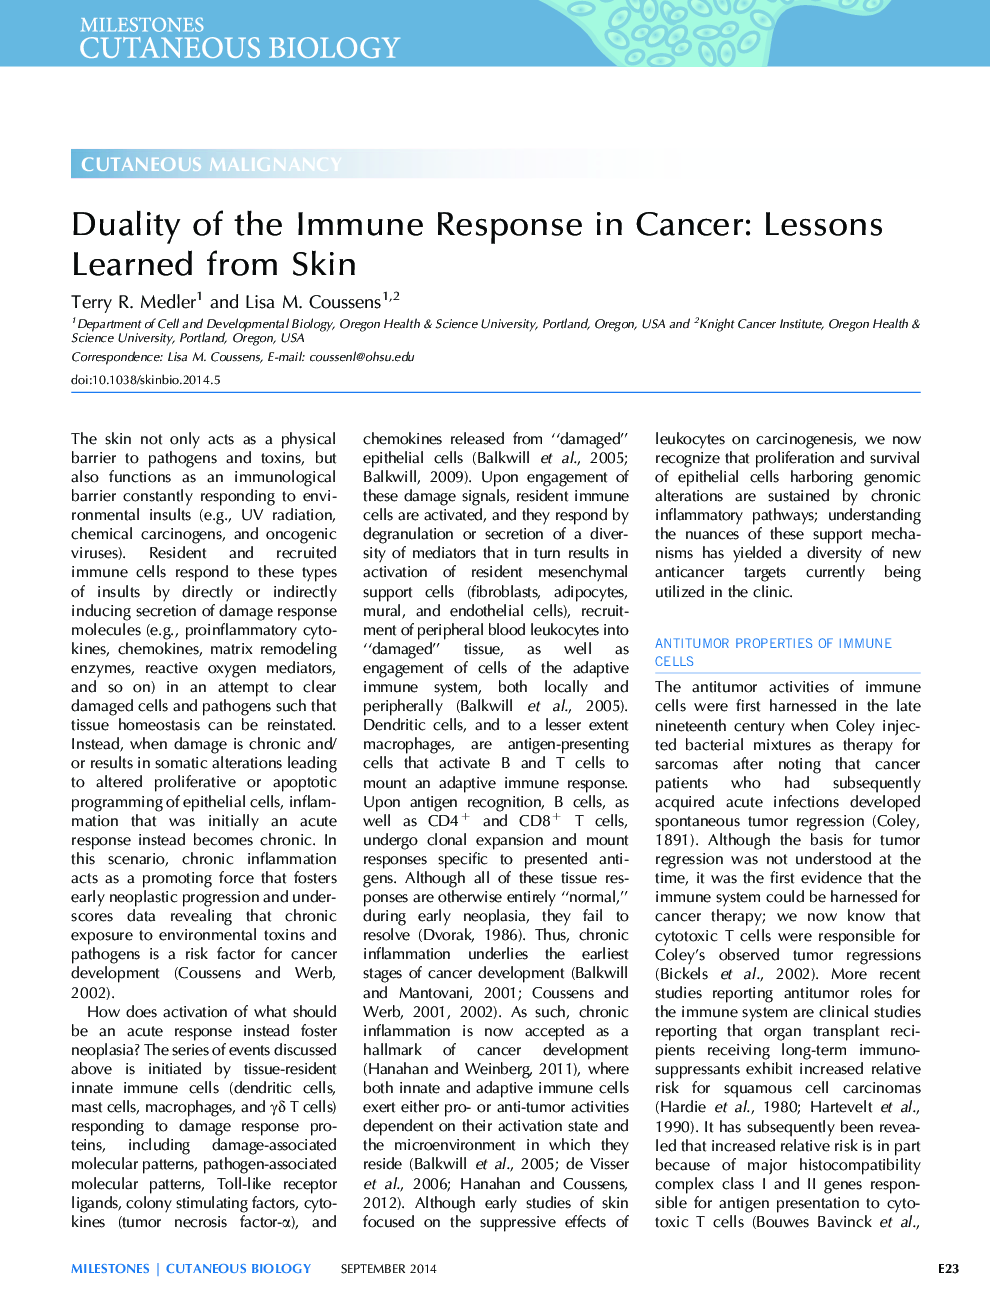 Duality of the Immune Response in Cancer: Lessons Learned from Skin